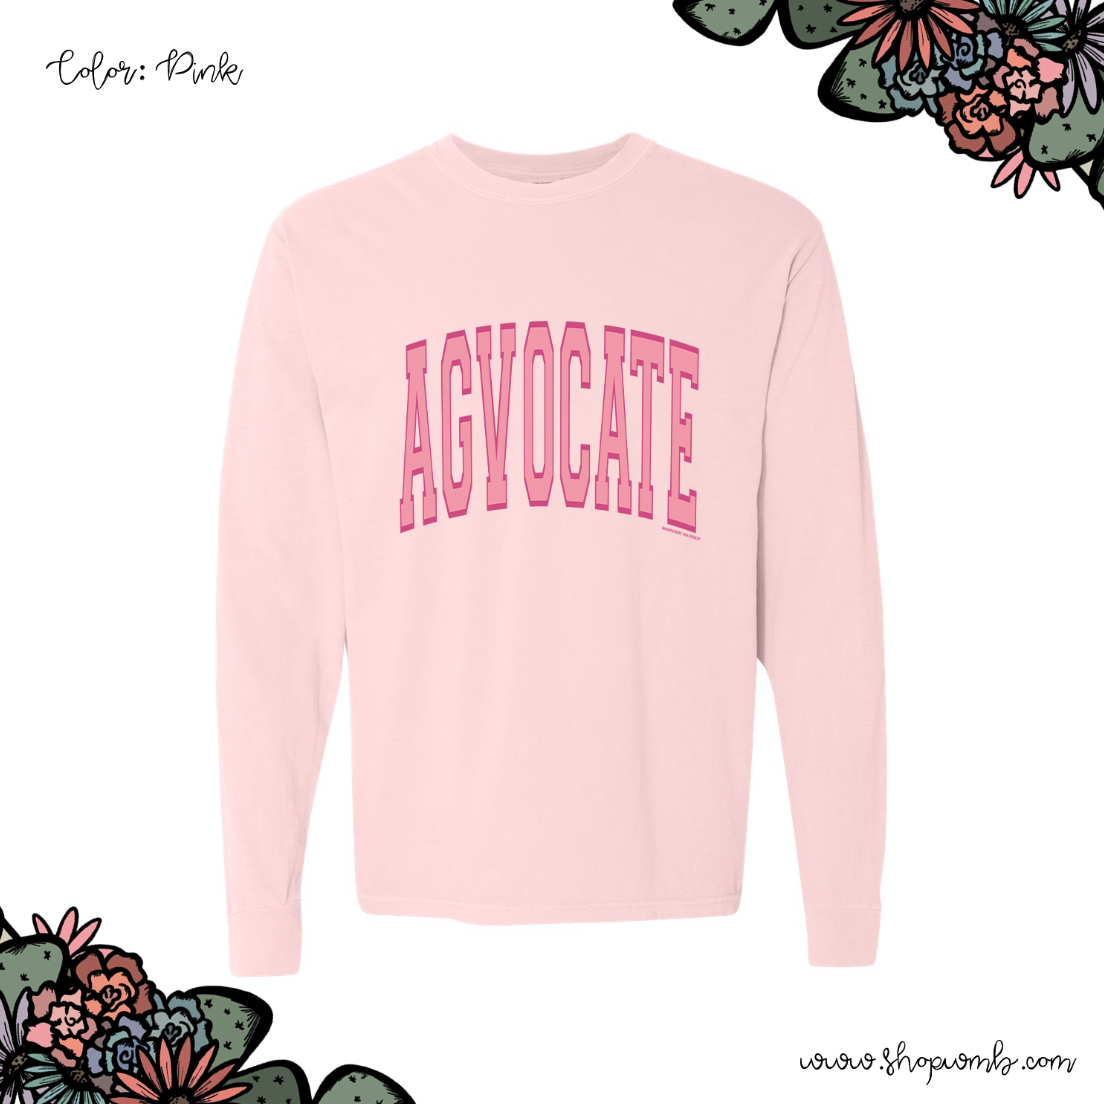 Big Varsity Agvocate Pink LONG SLEEVE T-Shirt (S-3XL) - Multiple Colors!